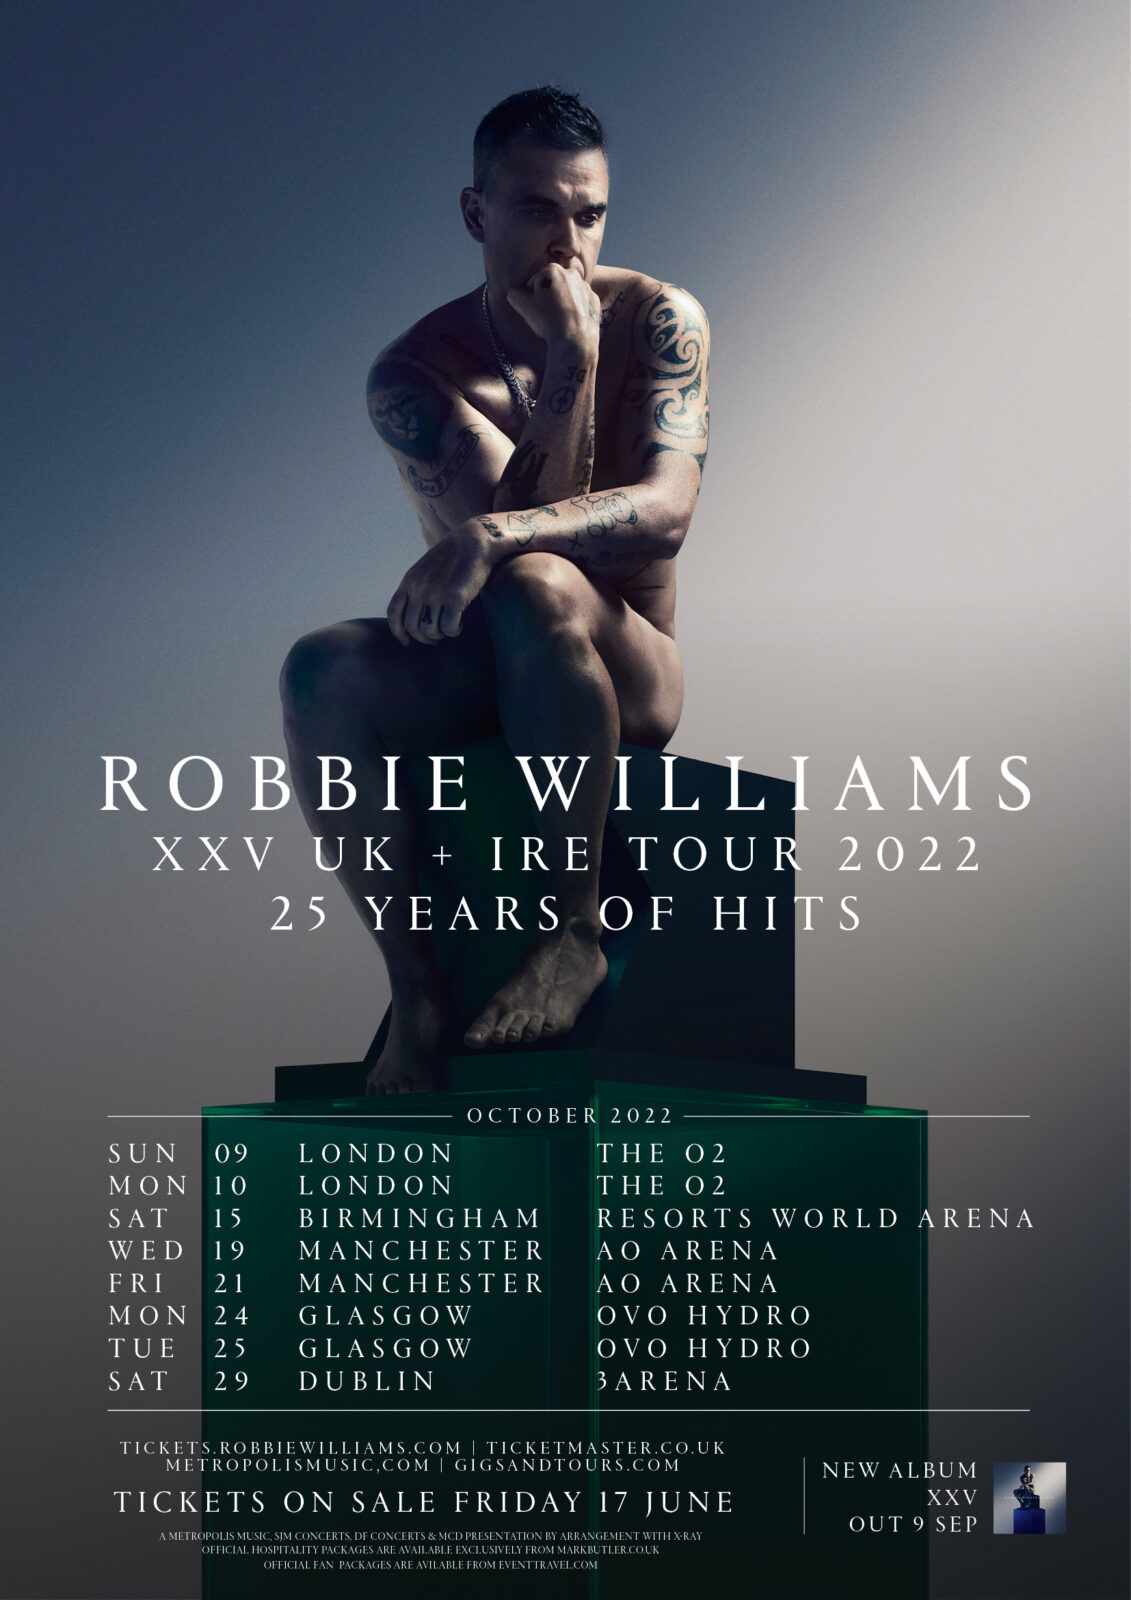 Robbie Williams announces greatest hits tour to mark 25-year solo career, The Manc